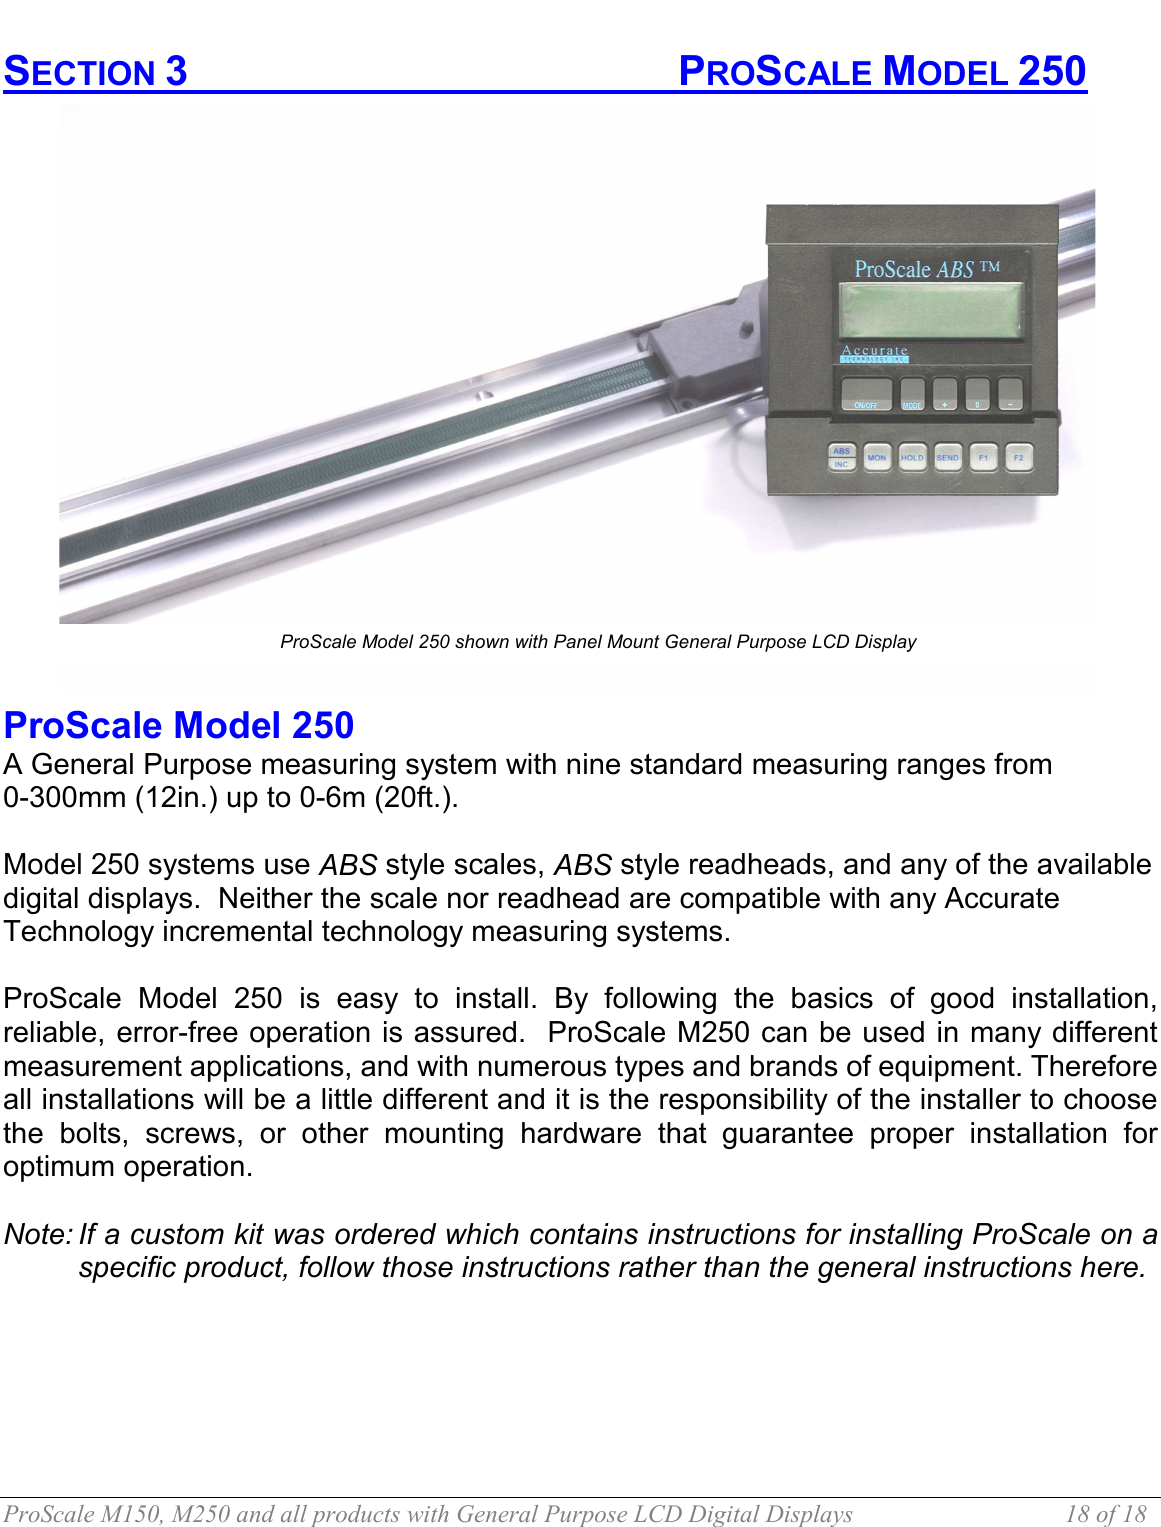  ProScale M150, M250 and all products with General Purpose LCD Digital Displays  18 of 18 SECTION 3       PROSCALE MODEL 250  ProScale Model 250  A General Purpose measuring system with nine standard measuring ranges from  0-300mm (12in.) up to 0-6m (20ft.).   Model 250 systems use ABS style scales, ABS style readheads, and any of the available digital displays.  Neither the scale nor readhead are compatible with any Accurate Technology incremental technology measuring systems.  ProScale Model 250 is easy to install. By following the basics of good installation, reliable, error-free operation is assured.  ProScale M250 can be used in many different measurement applications, and with numerous types and brands of equipment. Therefore all installations will be a little different and it is the responsibility of the installer to choose the bolts, screws, or other mounting hardware that guarantee proper installation for optimum operation.  Note: If a custom kit was ordered which contains instructions for installing ProScale on a specific product, follow those instructions rather than the general instructions here.  ProScale Model 250 shown with Panel Mount General Purpose LCD Display 